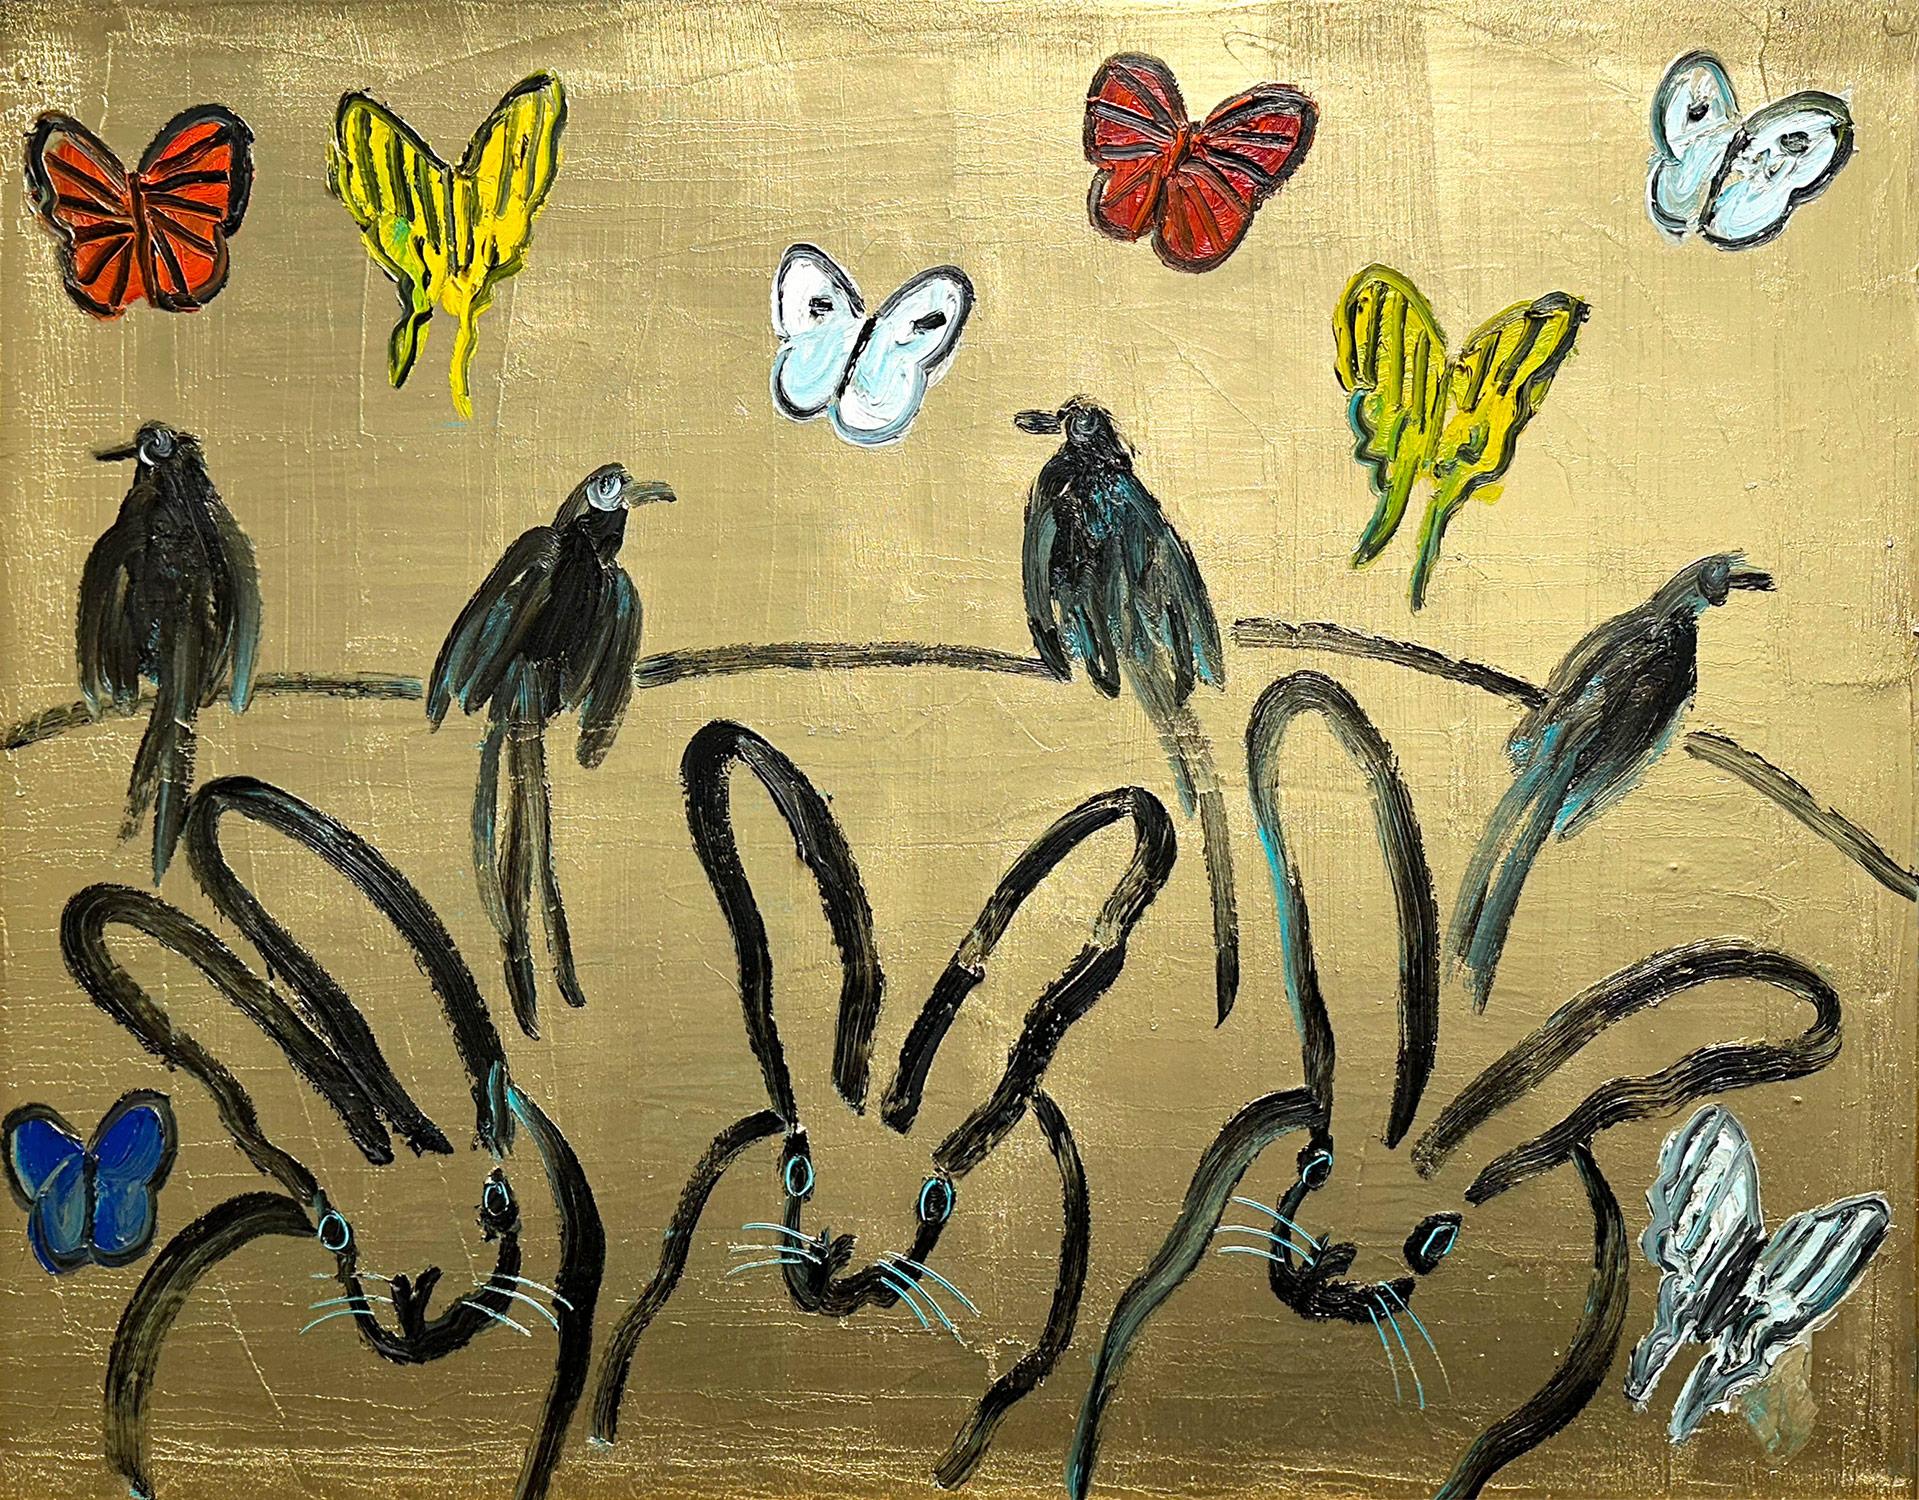 A wonderful composition of one of Slonem's most iconic subjects, Bunnies, Butterflies and Birds. This piece depicts  gestural figures of 3 blue eyed Bunnies, 8 multicolor Butterflies and 4 black Long-tailed Paradise Whydah Birds against a rich